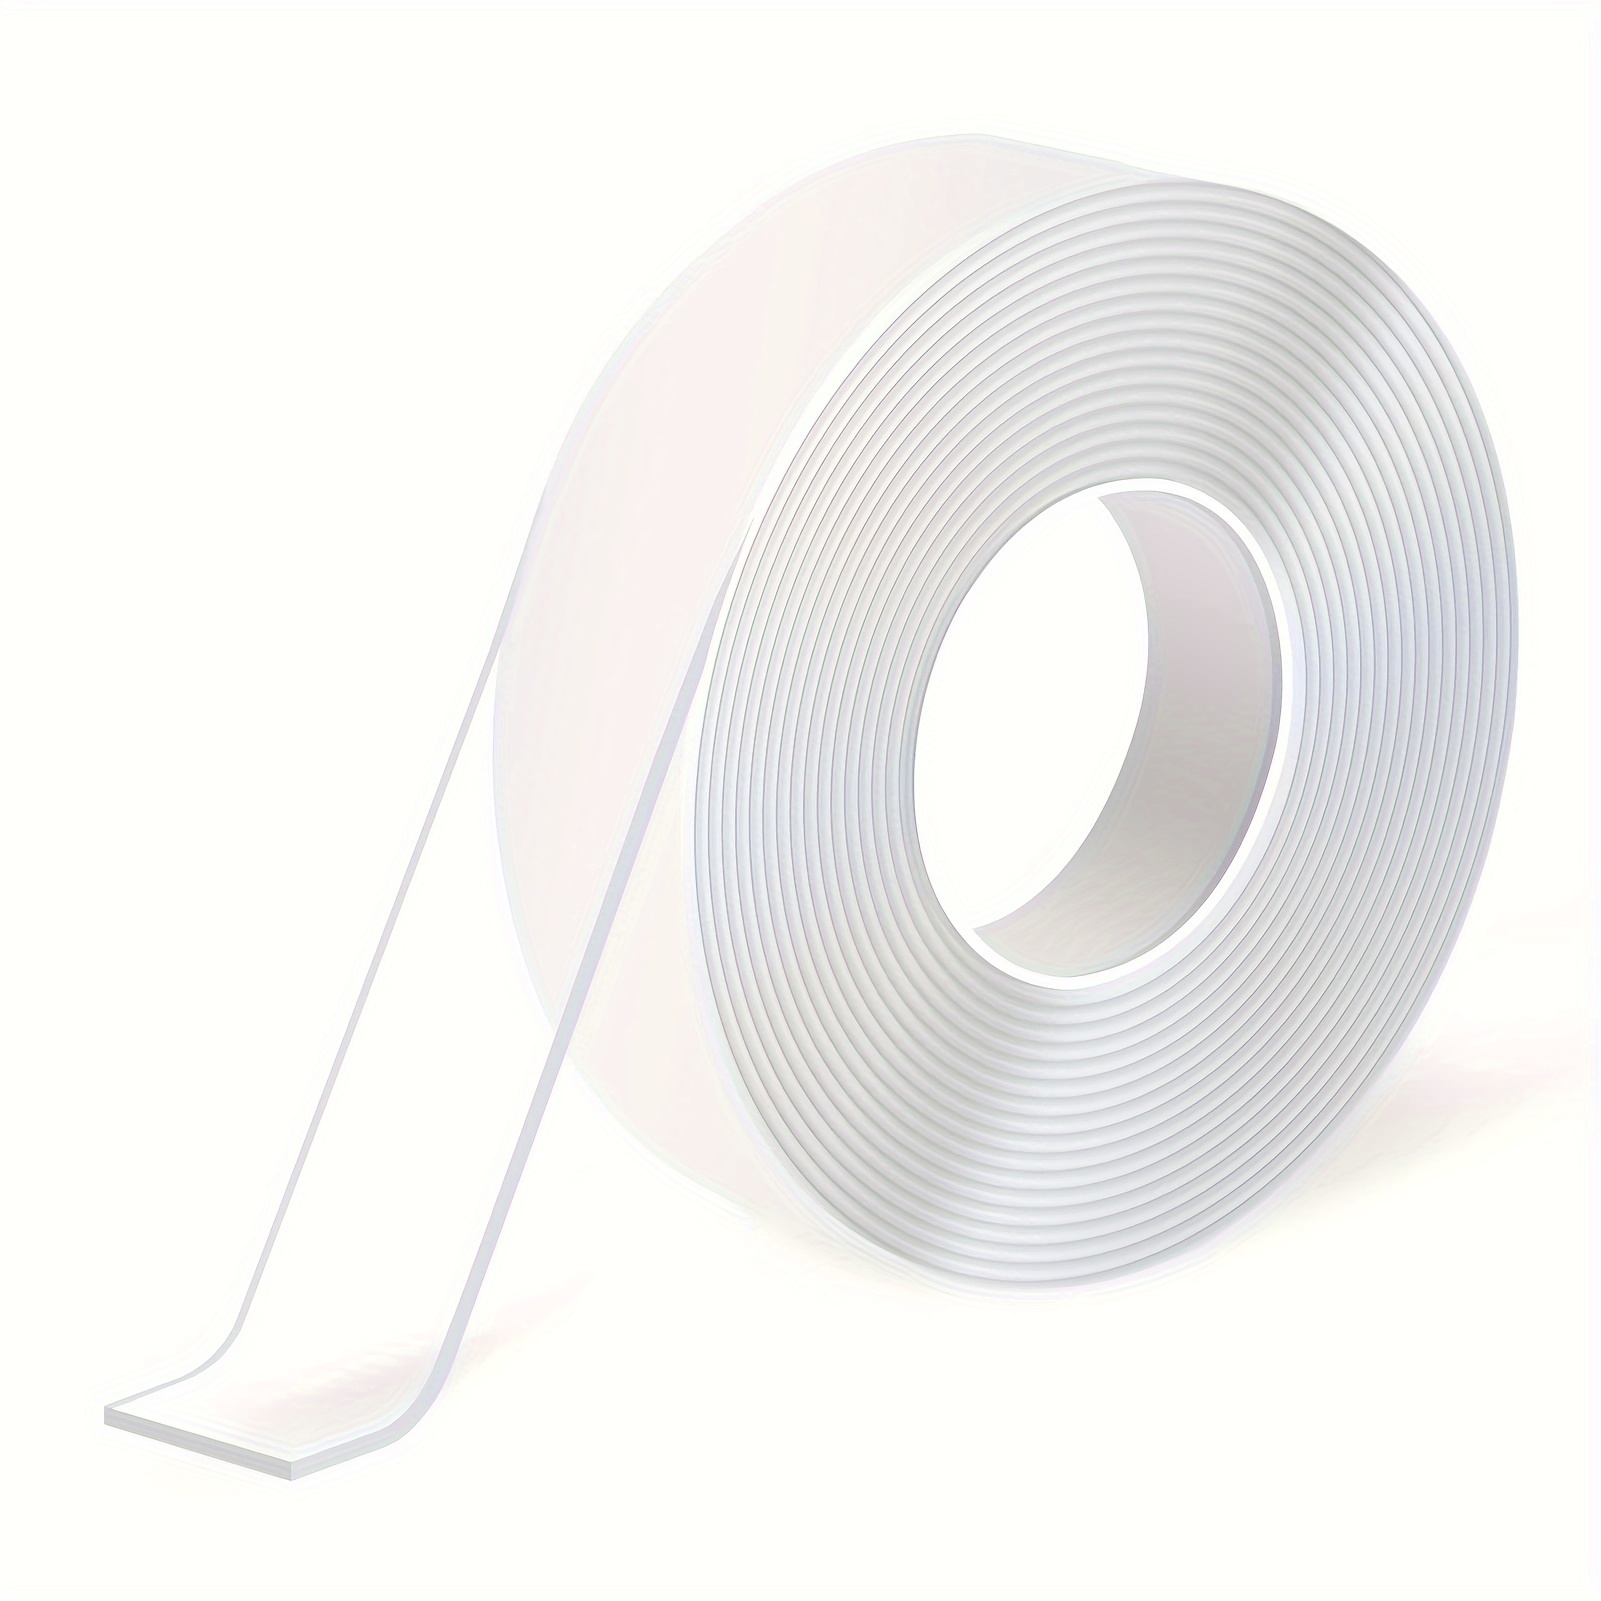 Strong Double Sided Tape Heavy Duty,Removable & Reusable Clear Mounting  Tape Adhesive Grip,Waterproof Two Sided Stick Tape Strips,Nano Magic Tape  Poster Carpet Tape for Walls Outdoor (9.85ft) 